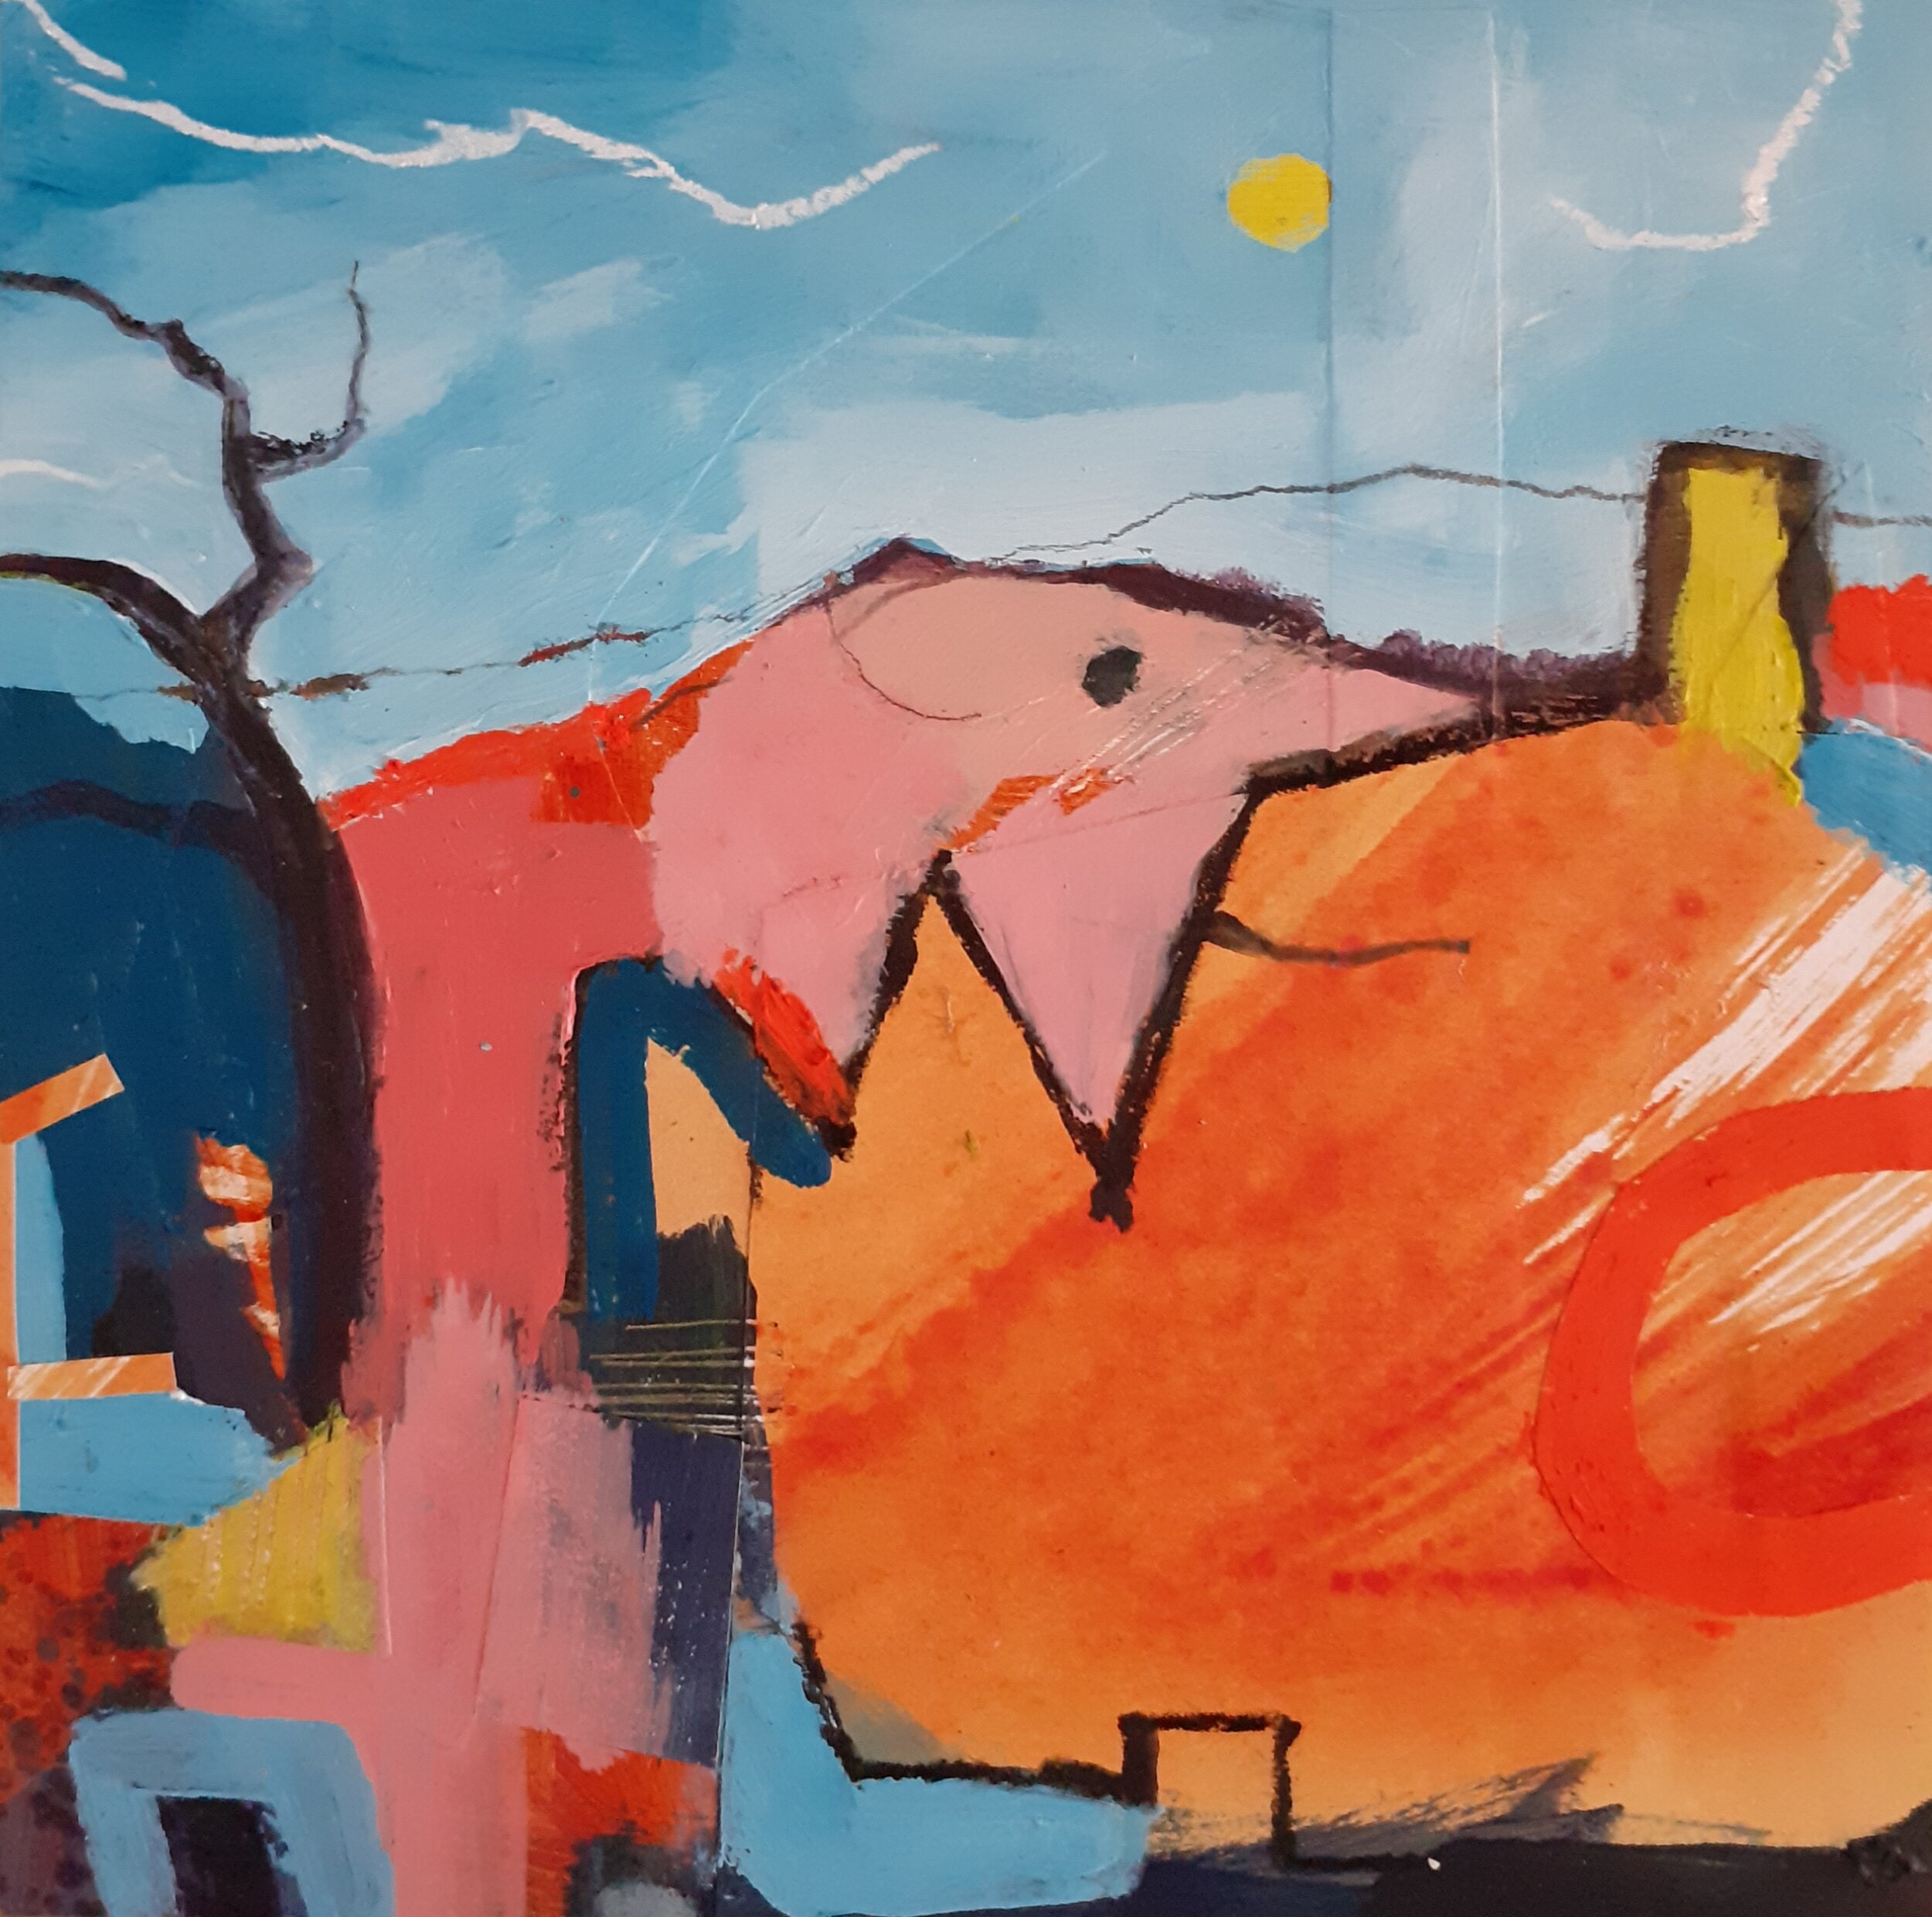 Rooftops, Rodden, Frome. Mixed media on cradled board 20 by 20cm.jpg